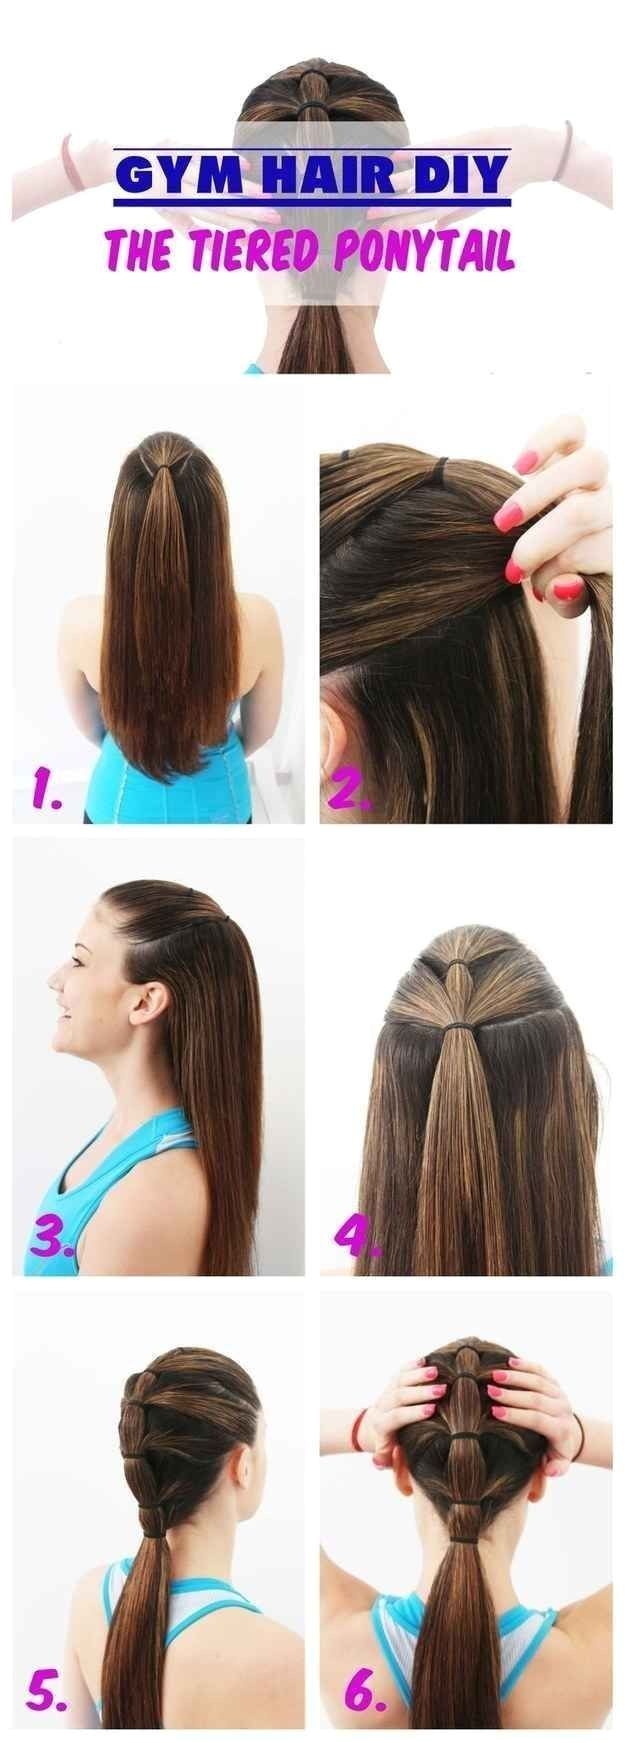 18 Ways To Get Your Bangs Out Your Face Soccer HairstylesGym